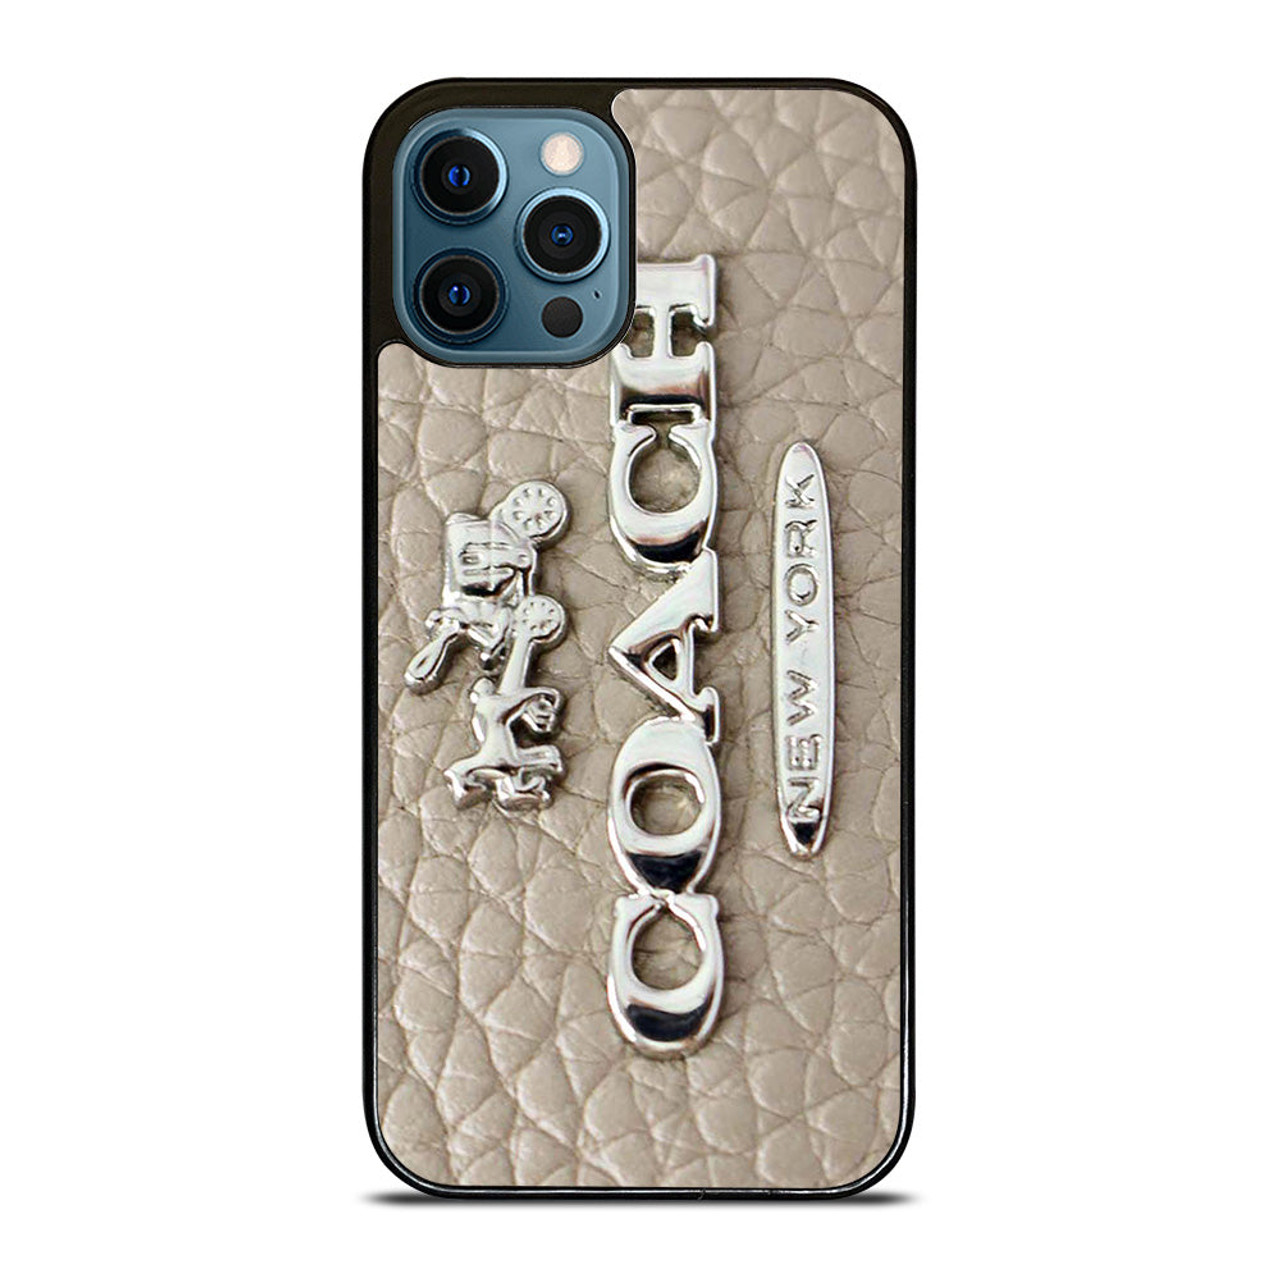 COACH LOGO GLOWING TEXTURE iPhone 12 Pro Max Case Cover